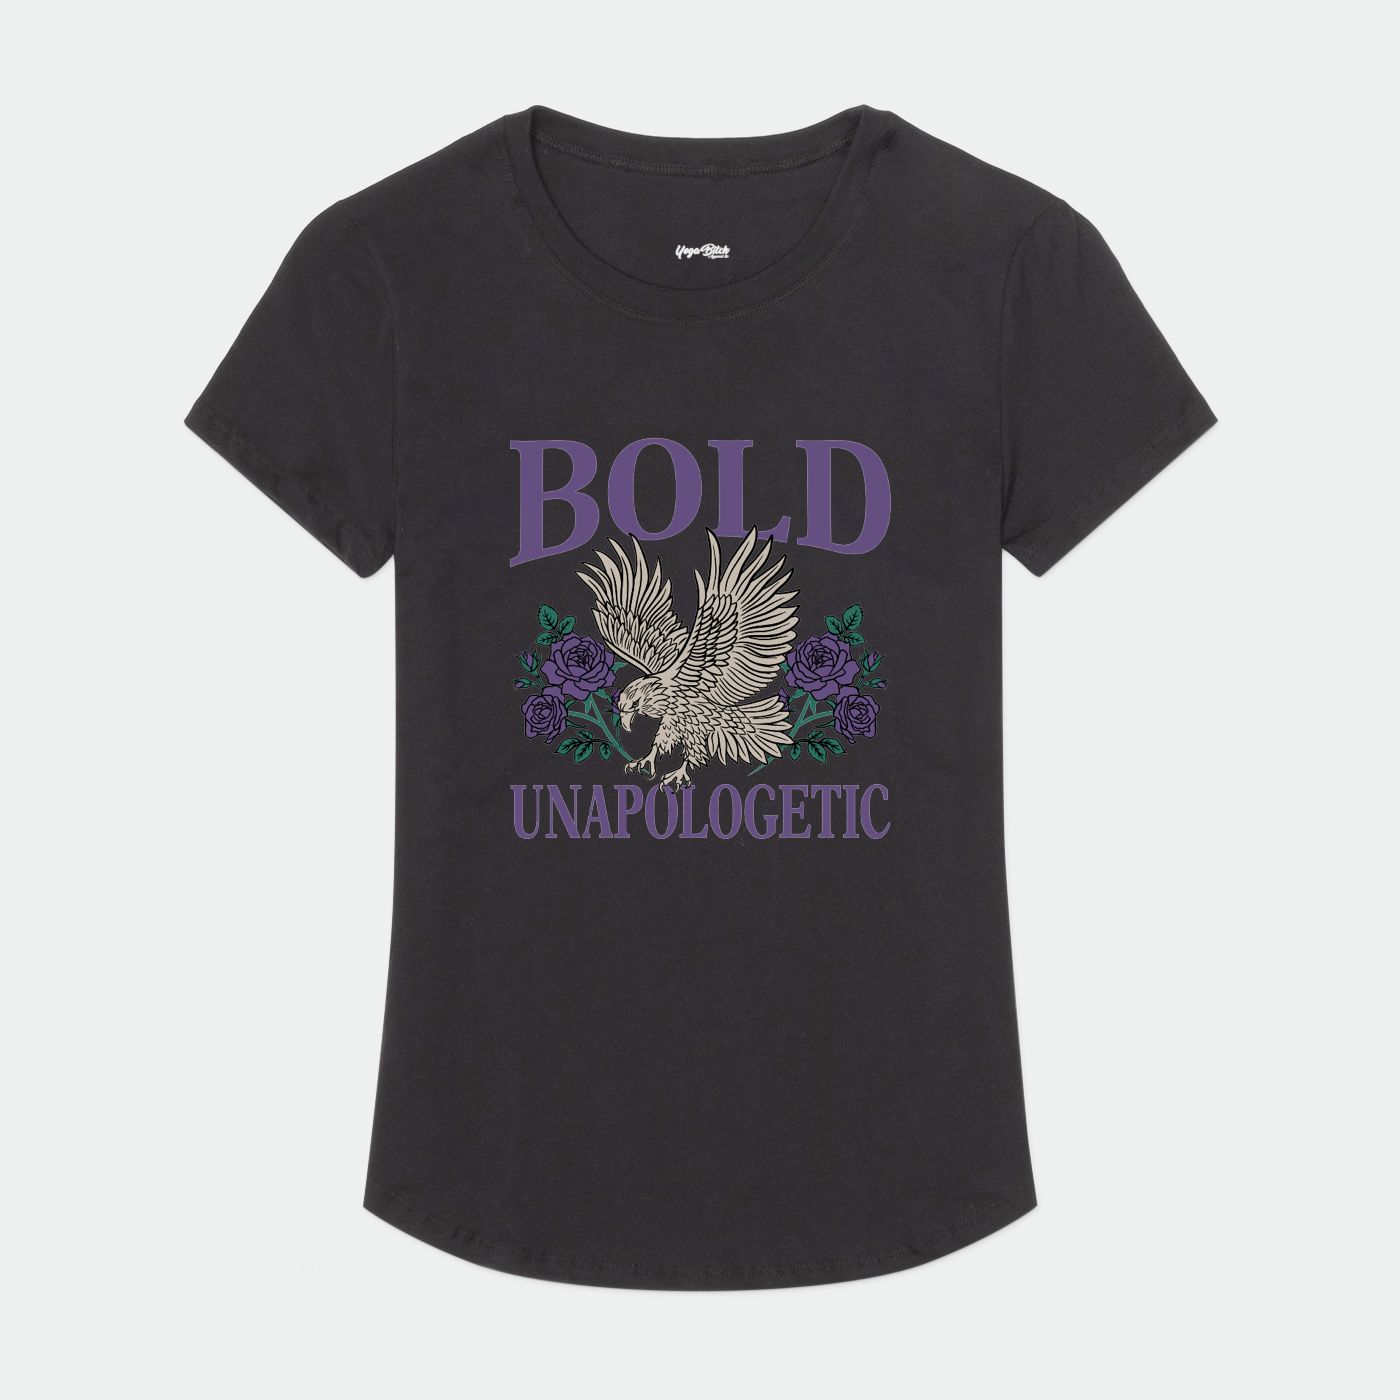 Bold and Unapologetic Dreamy Short Sleeve Tee - Yoga Bitch